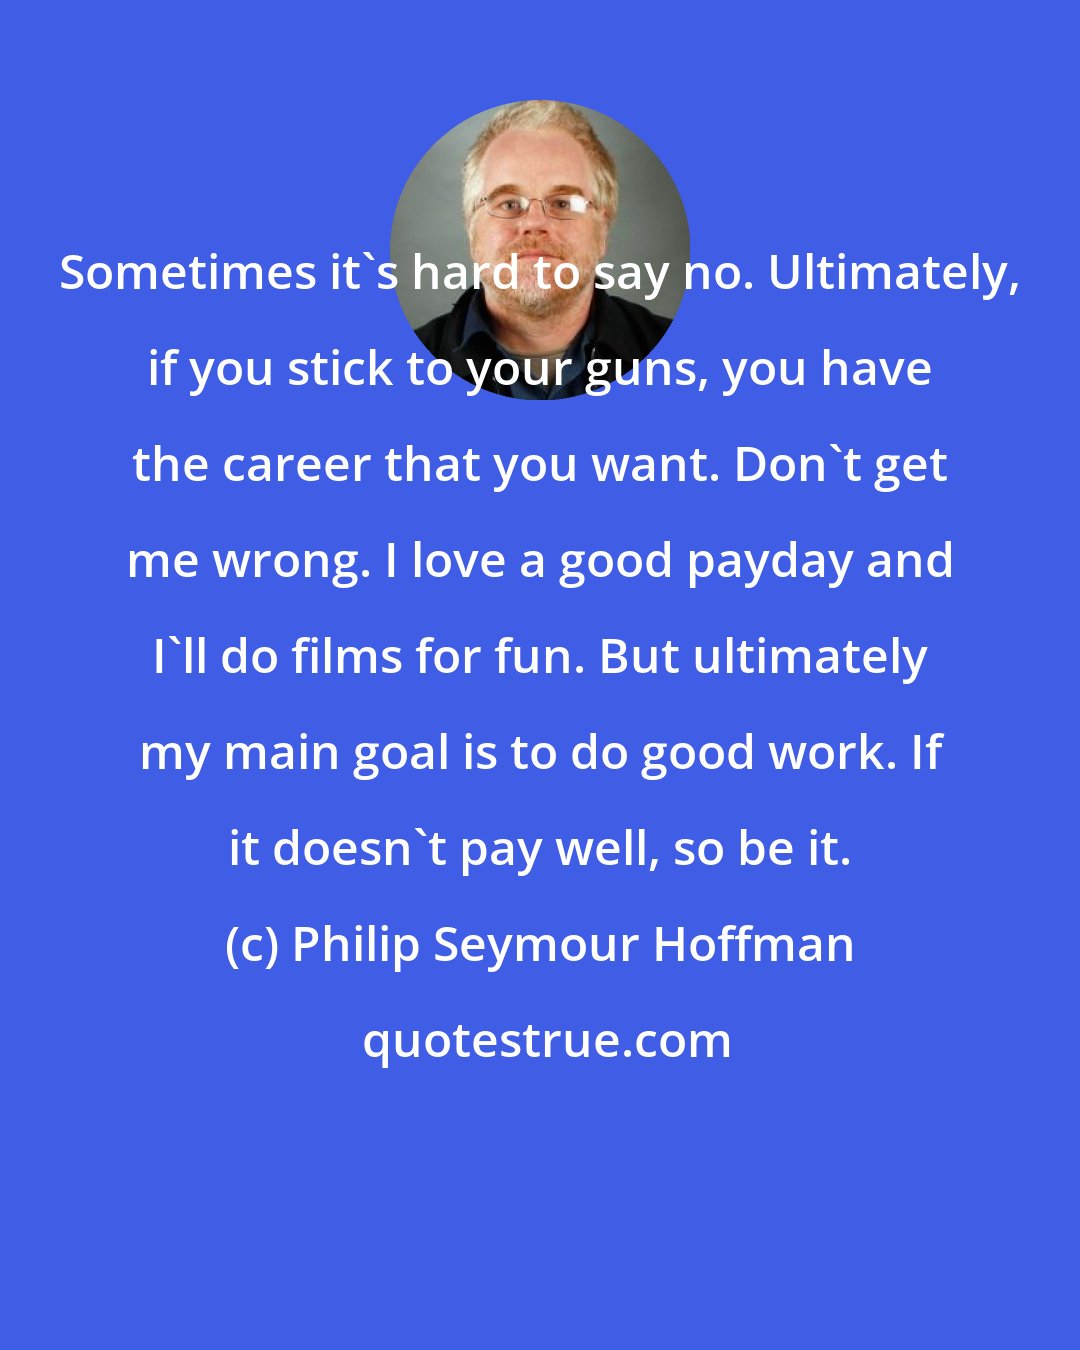 Philip Seymour Hoffman: Sometimes it's hard to say no. Ultimately, if you stick to your guns, you have the career that you want. Don't get me wrong. I love a good payday and I'll do films for fun. But ultimately my main goal is to do good work. If it doesn't pay well, so be it.